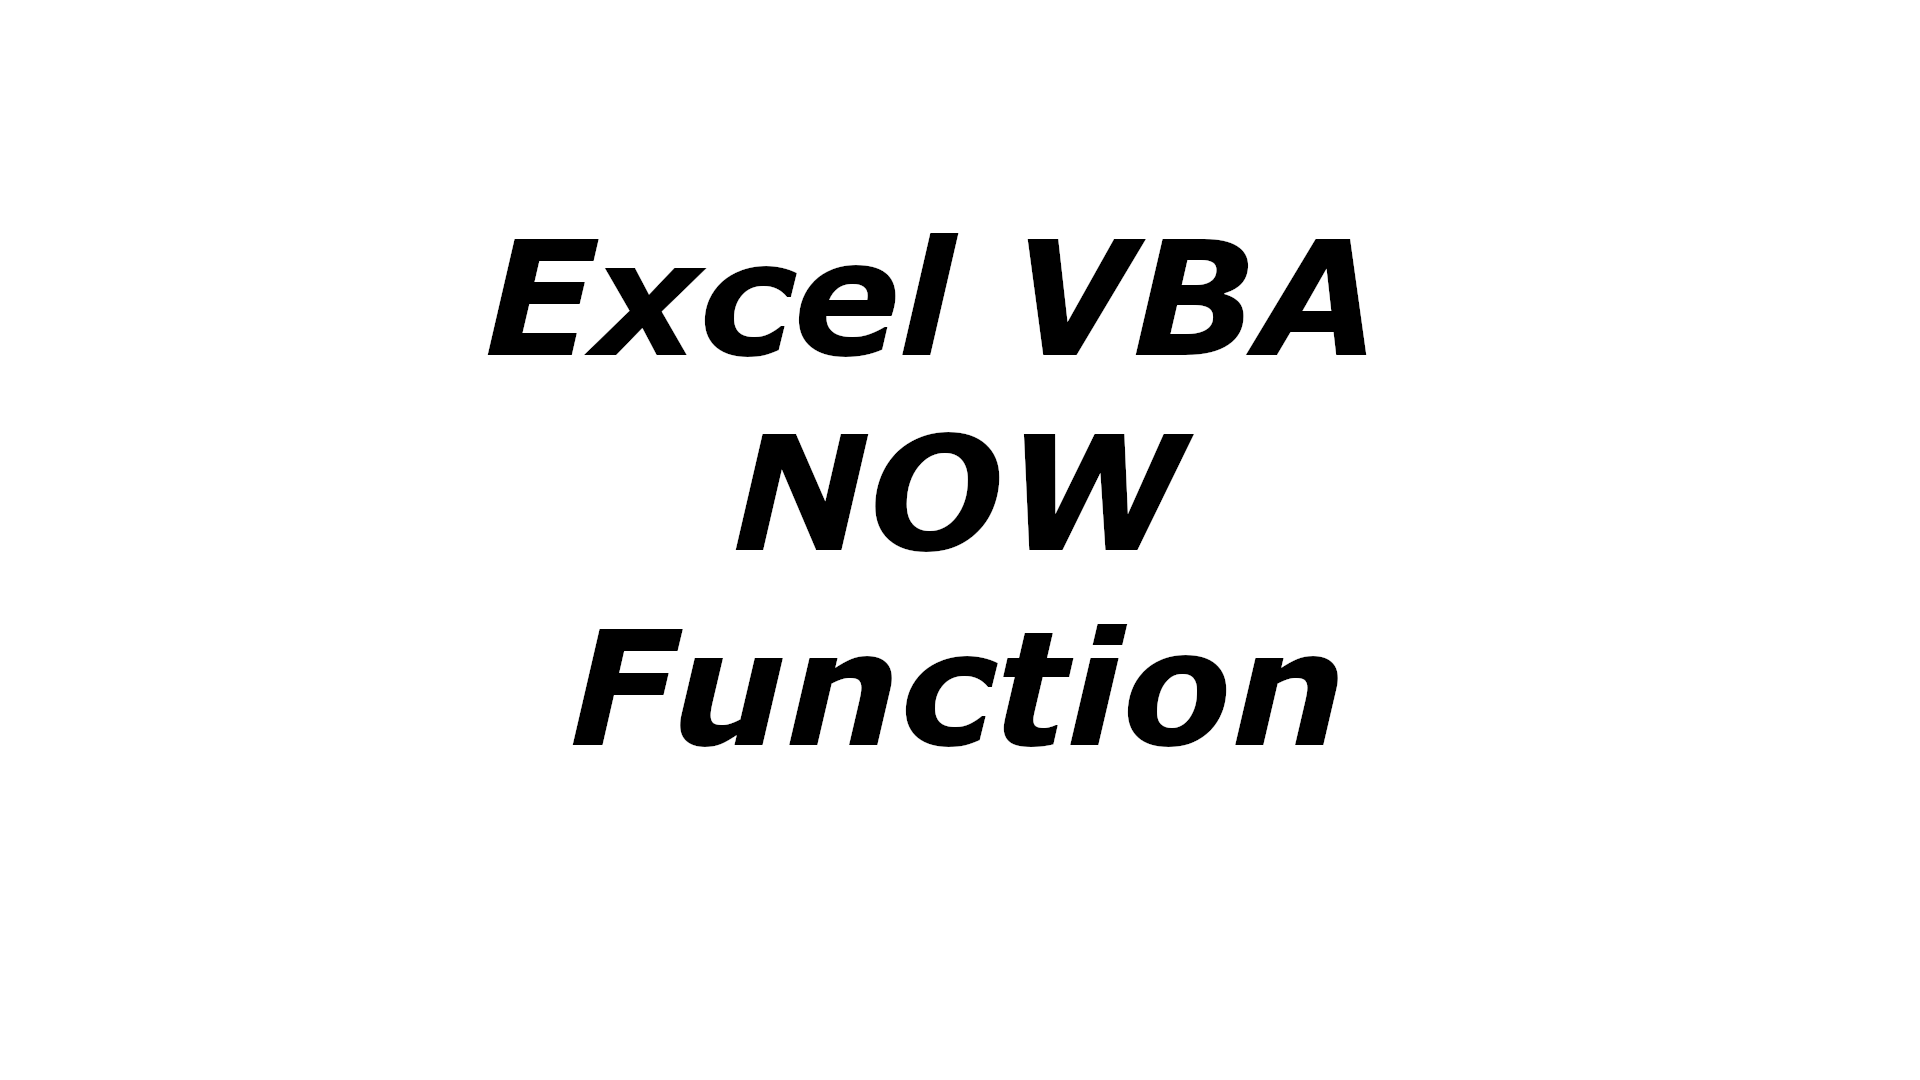 Excel VBA NOW function